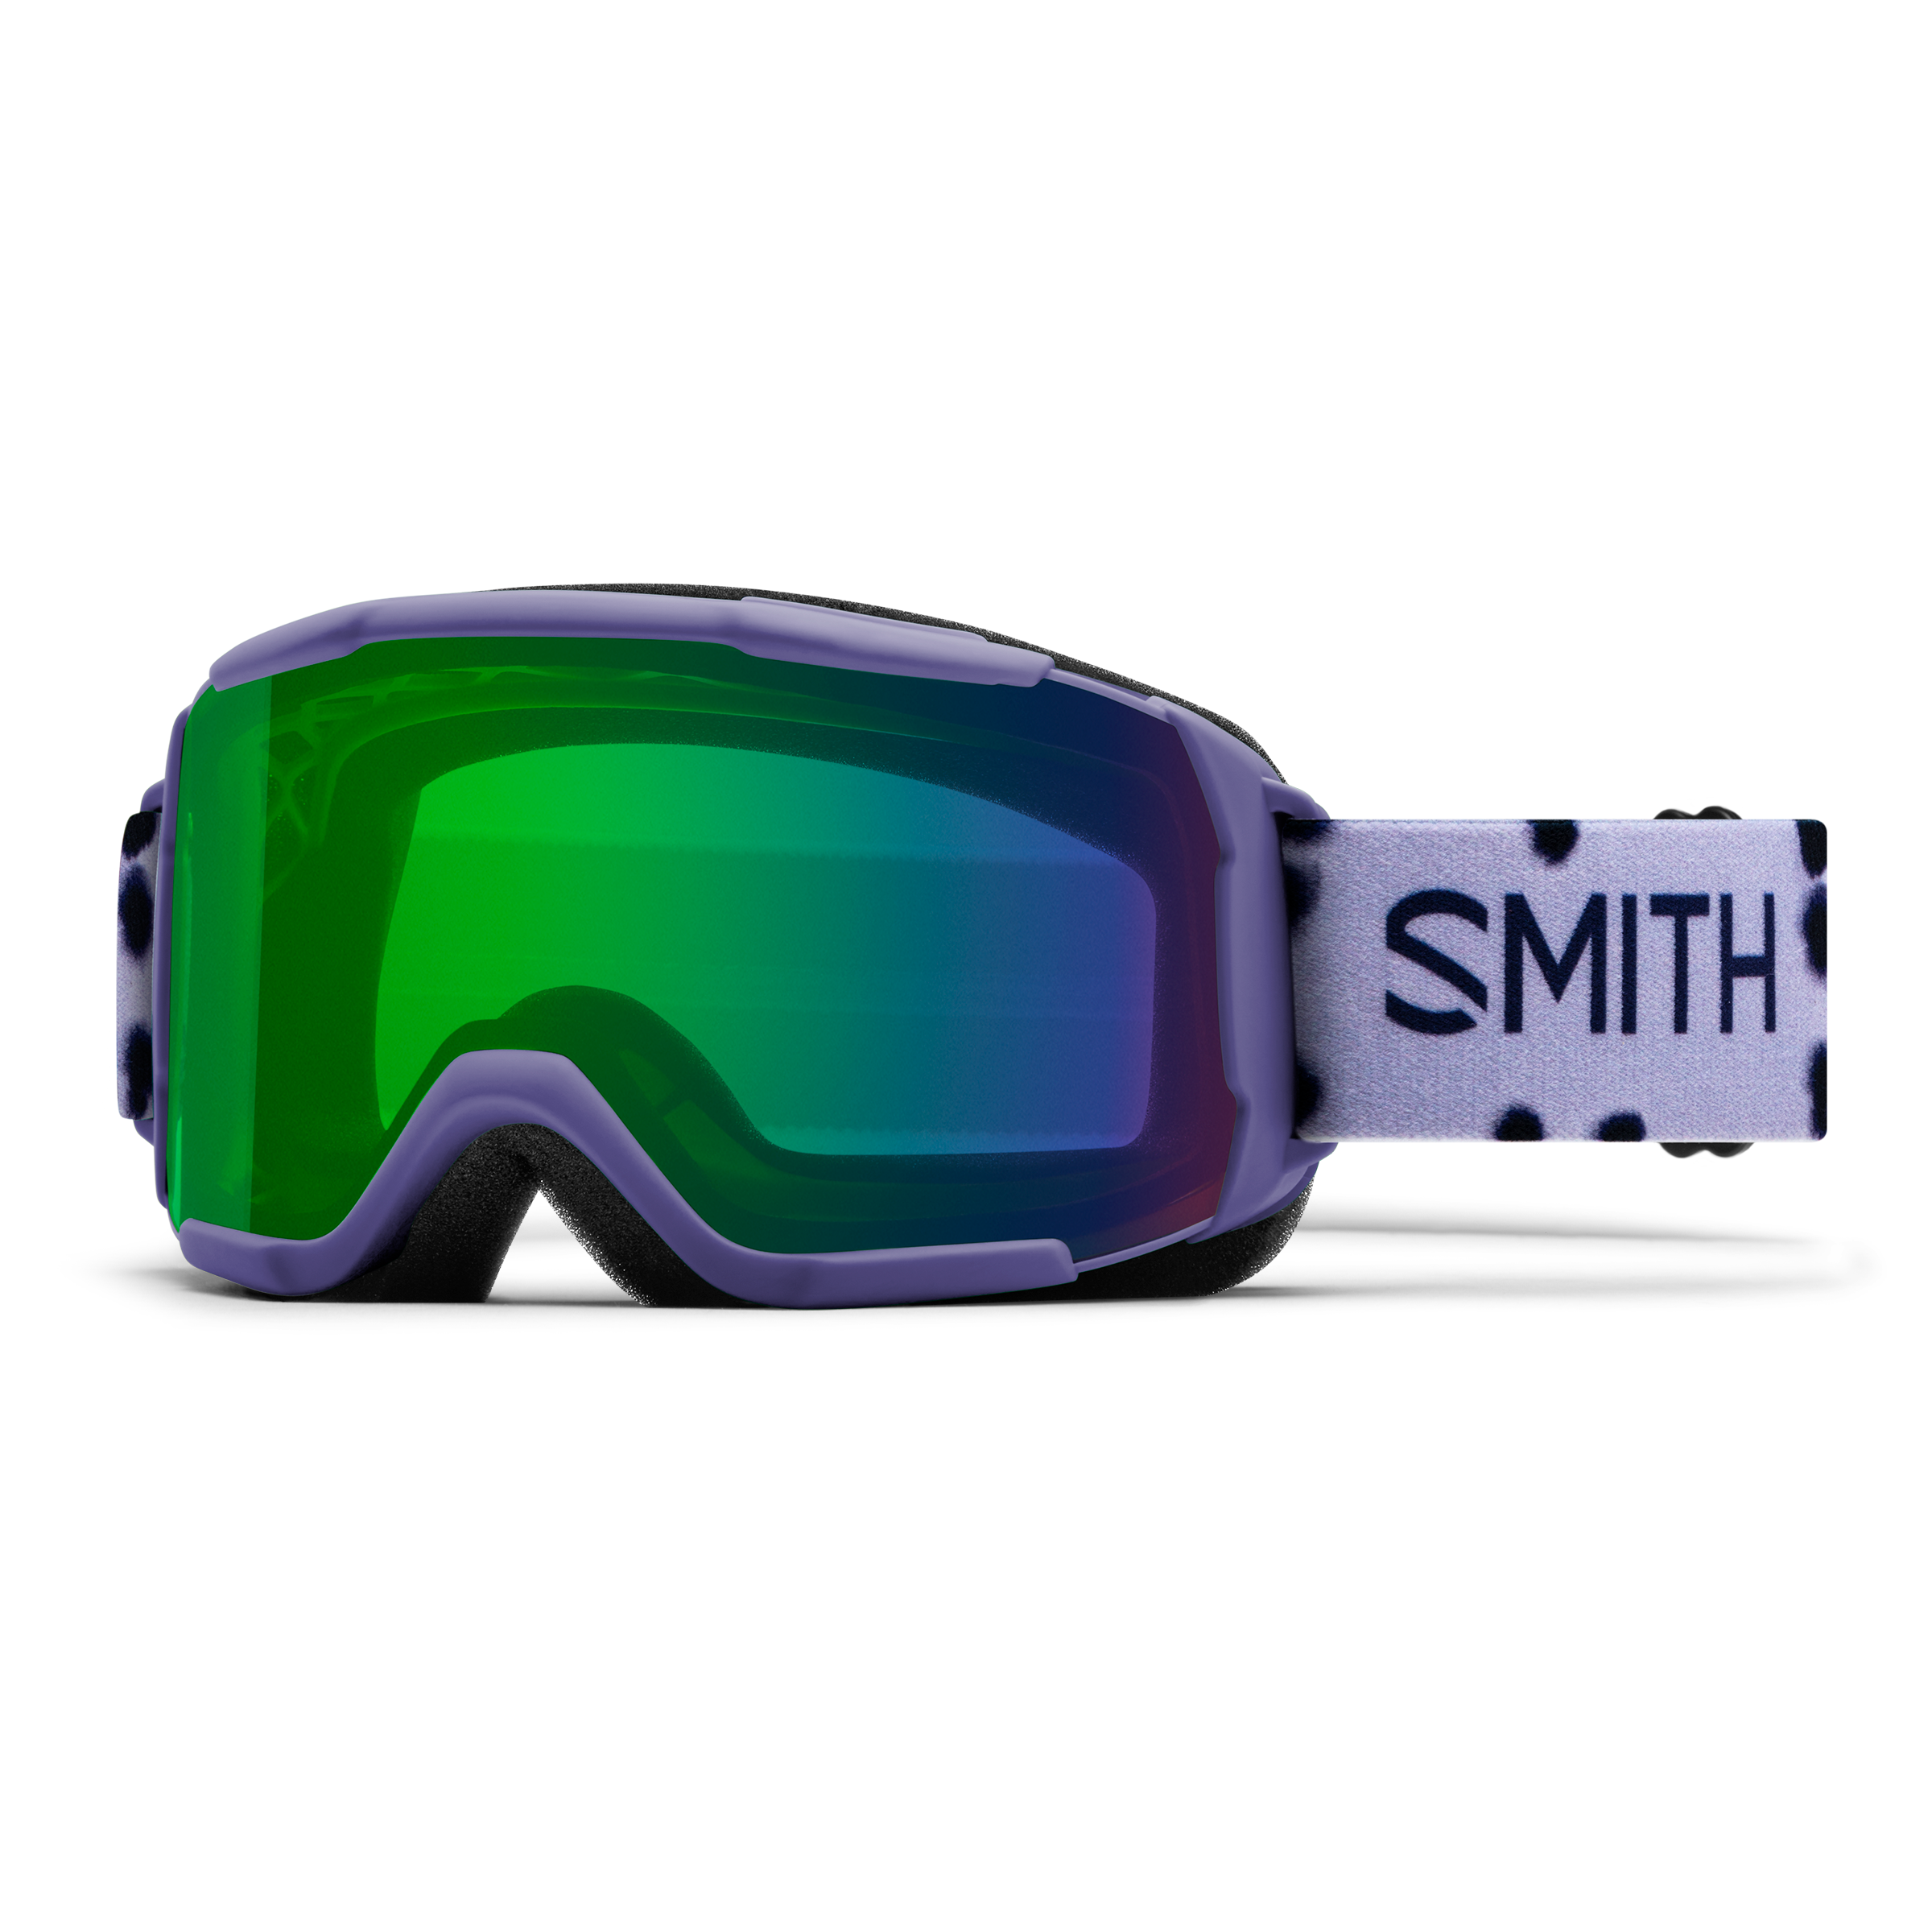 Smith Optics Showcase OTG Snow Goggles w/ Carbonic-X Lens Made In The USA 